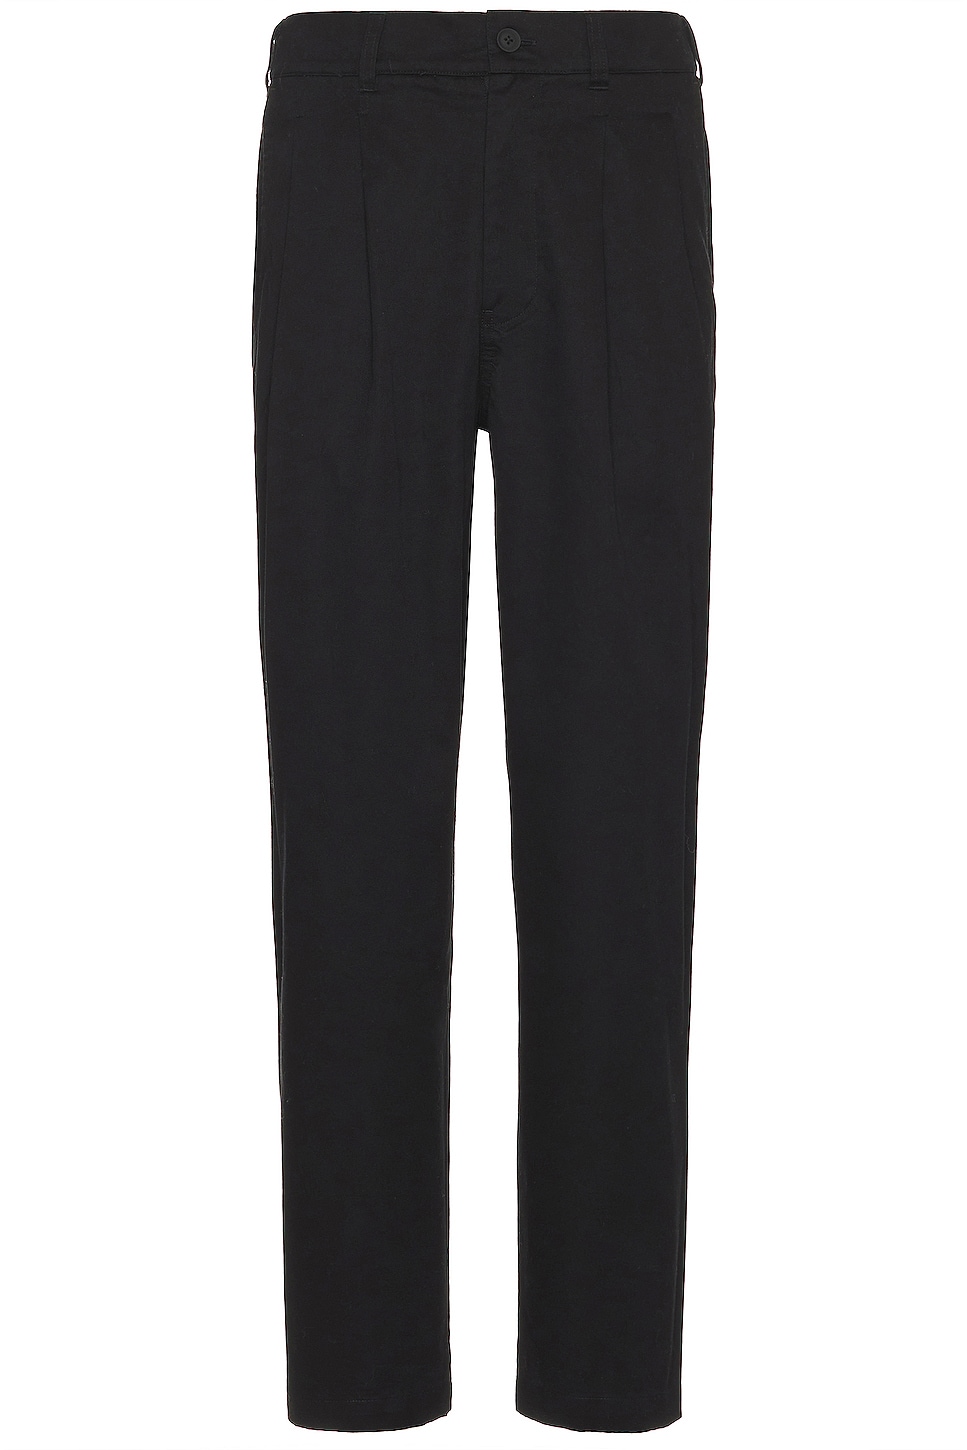 Image 1 of WAO Double Pleated Chino Pant in black